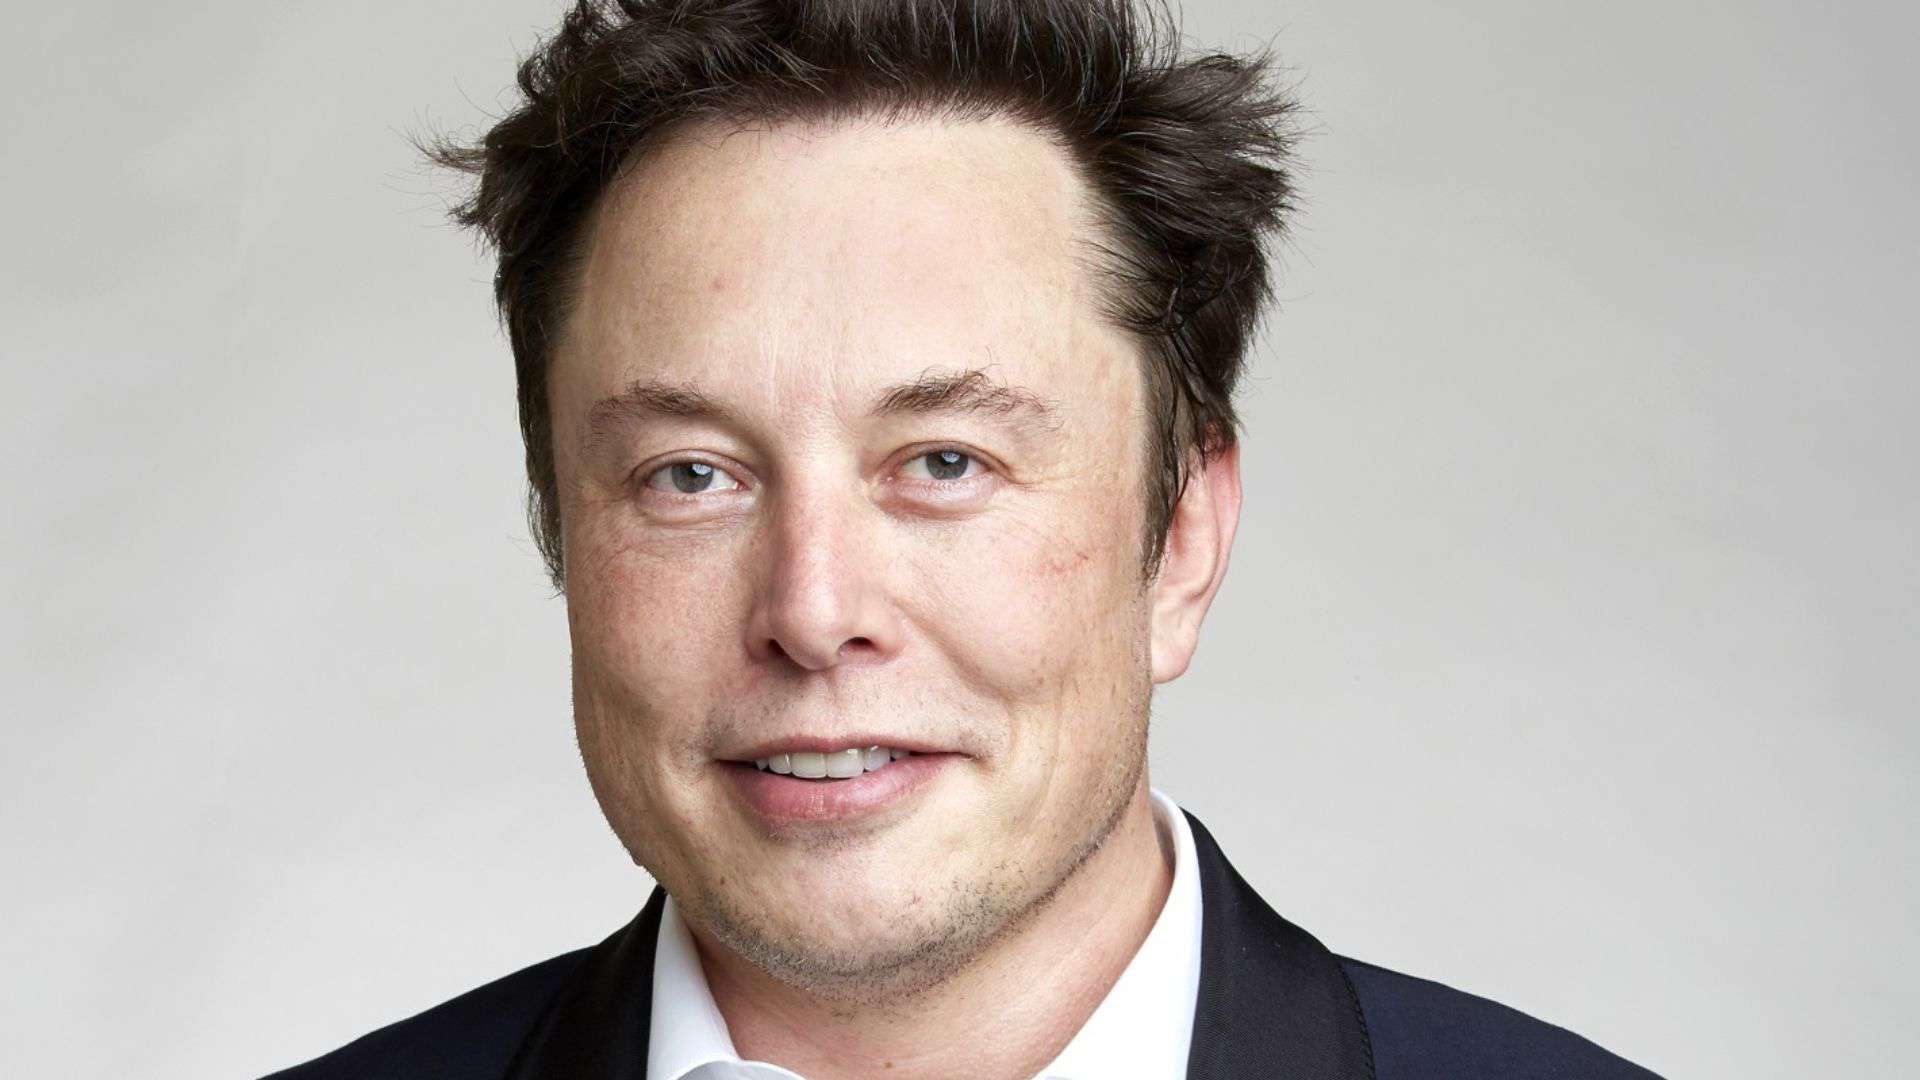 Elon Musk quits Tesla to become full time DJ